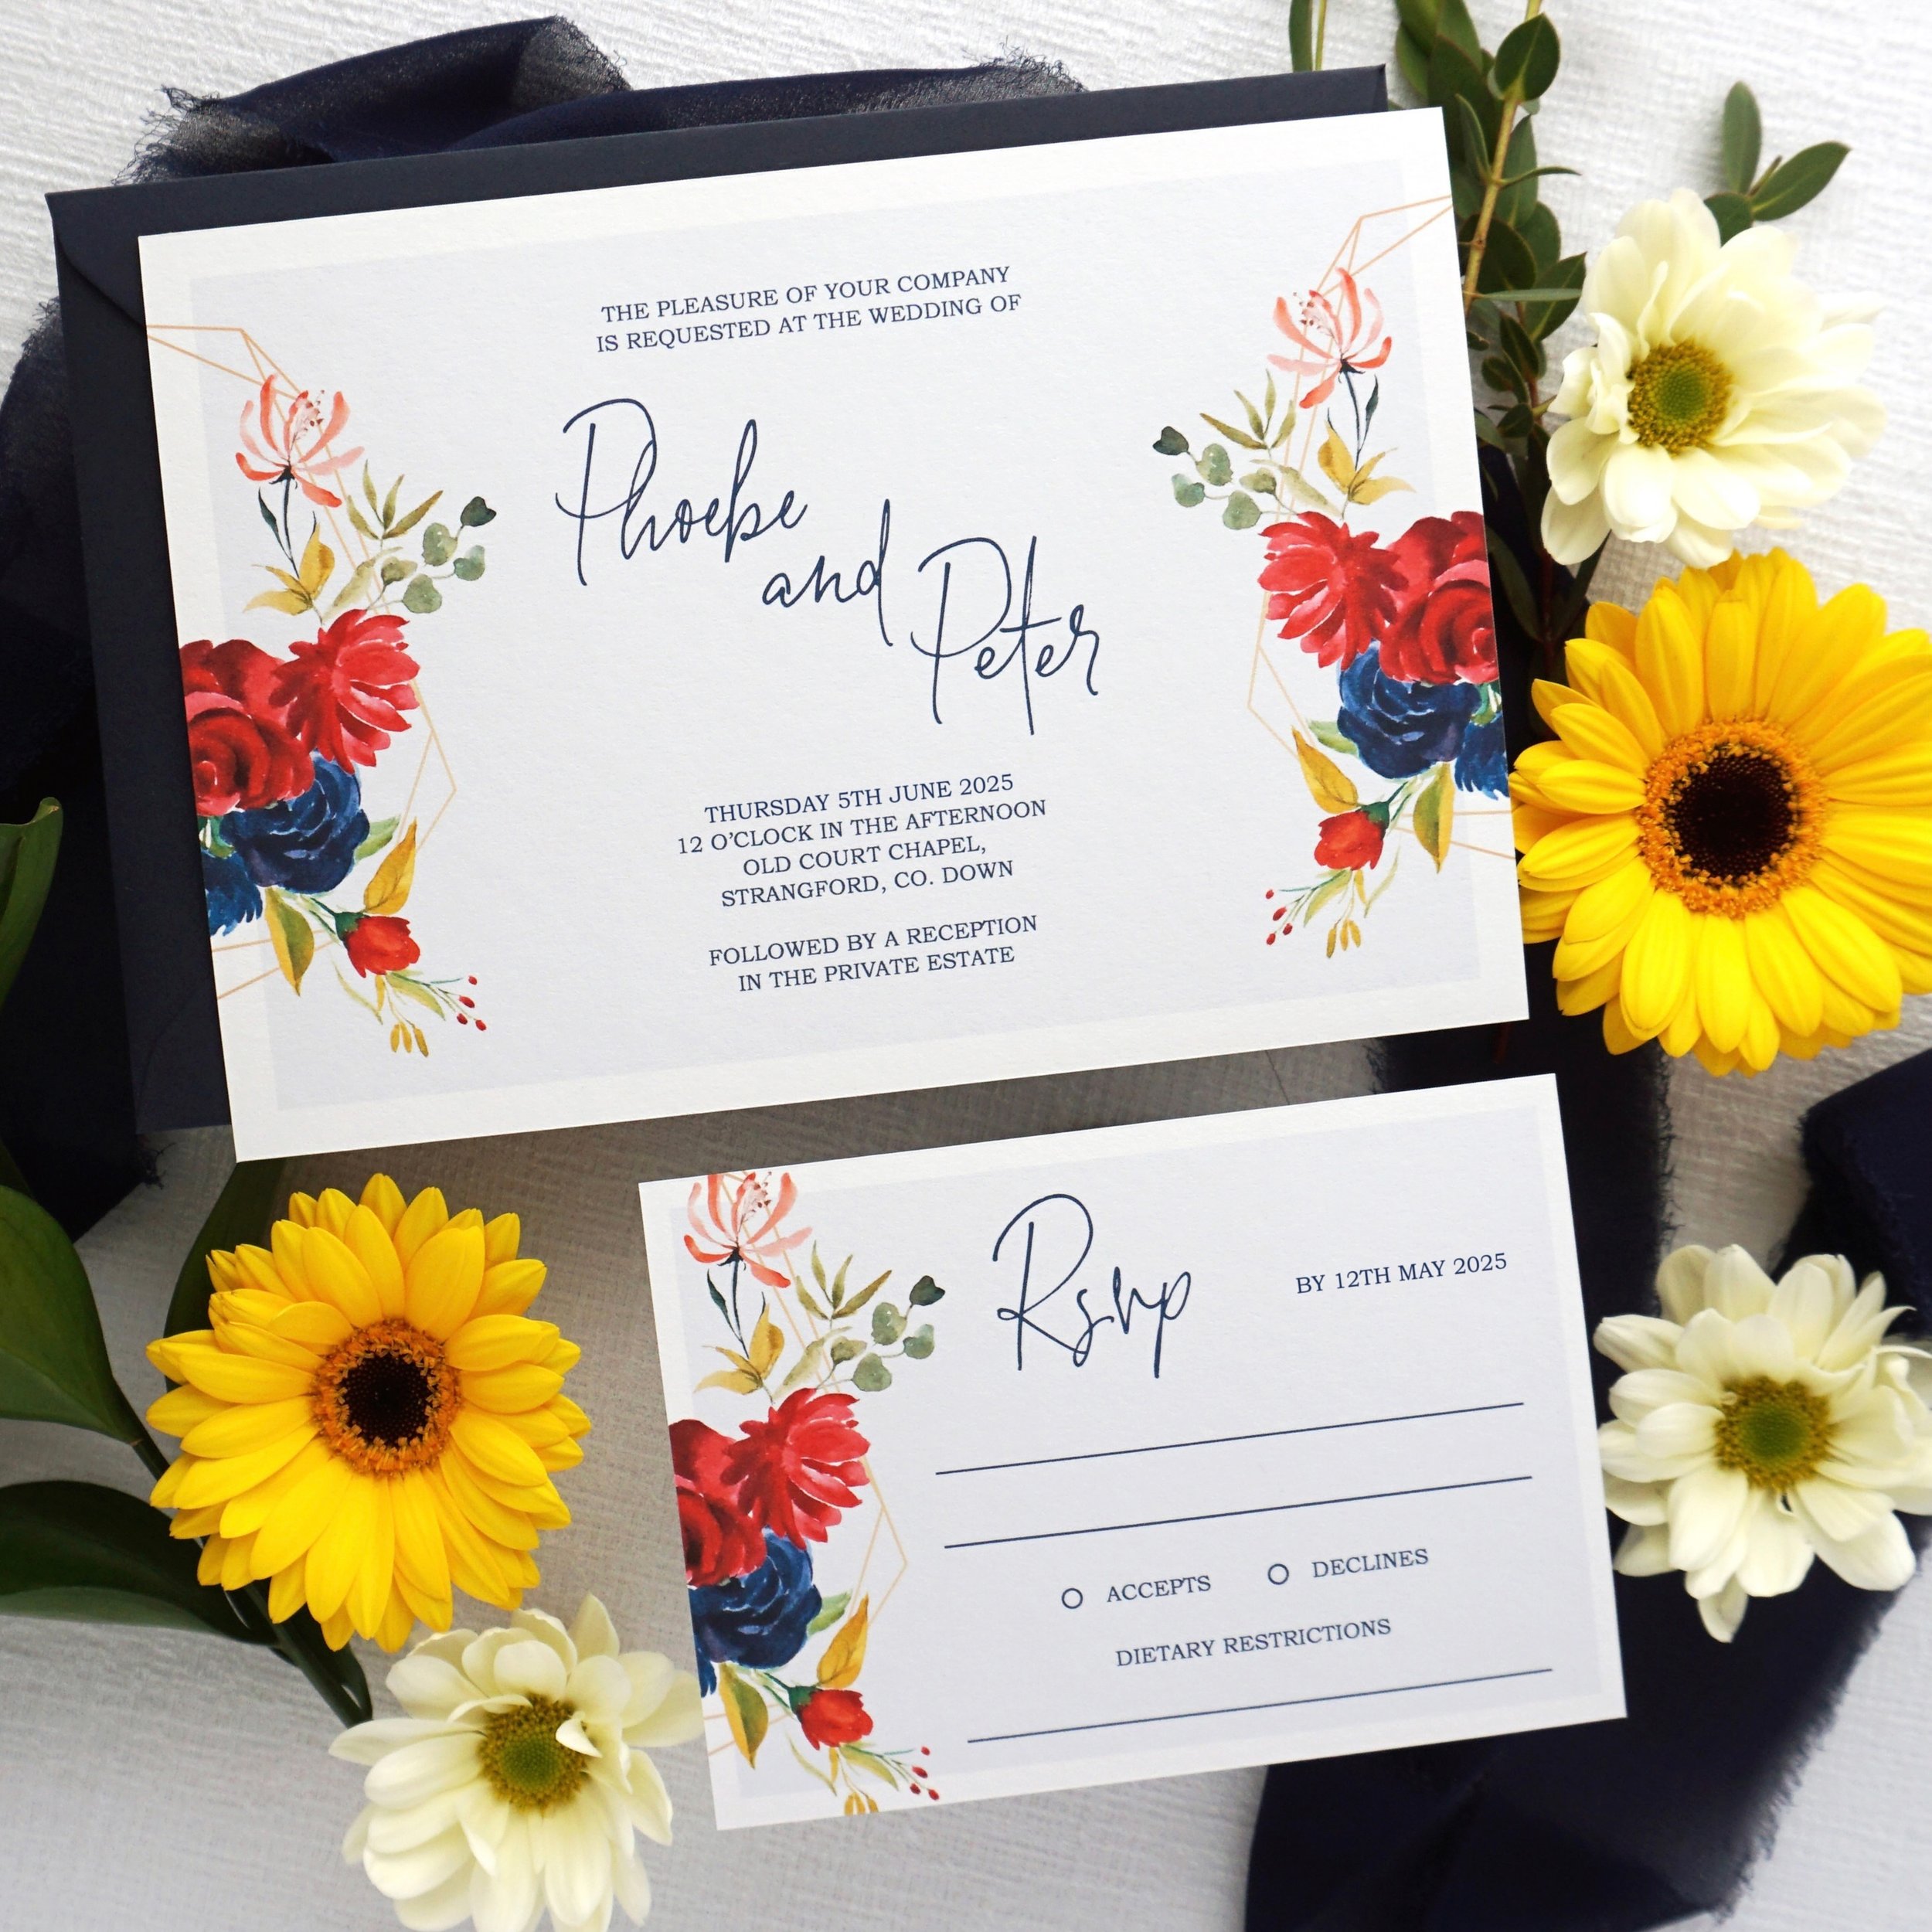 PHOEBE - Fall head over heels for this colourful invitation. With eye-catching  florals and playful fonts, this suite is perfect for late summer or early autumn weddings 
.
.
.
#weddingstationerysample #samplestationery #weddingstationery #gettingmar